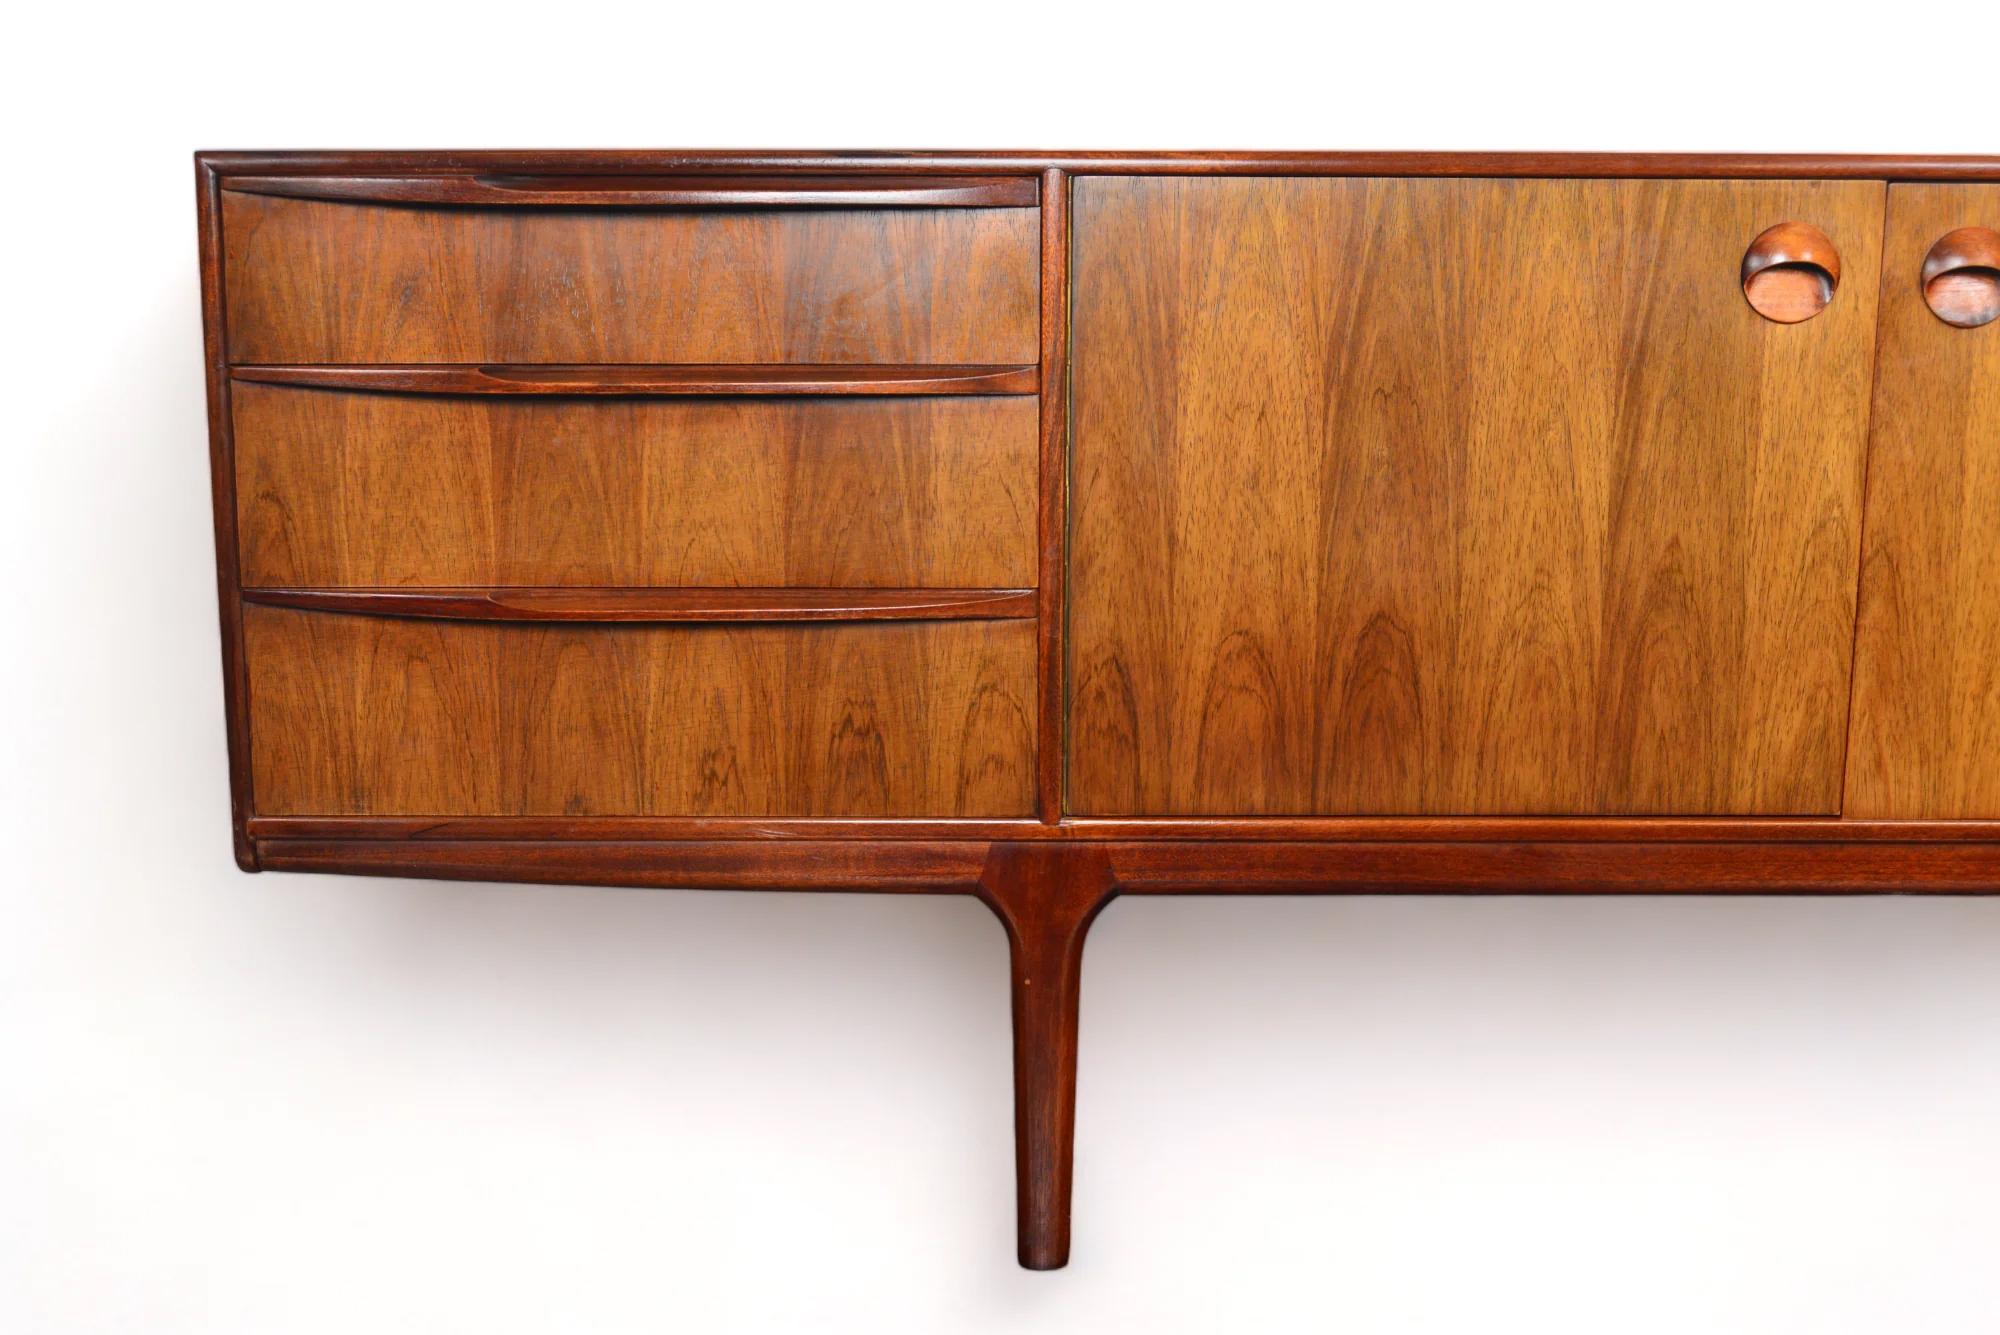 Origin: Scotland
Designer: Val Rossi
Manufacturer: A.H. McIntosh
Era: 1960s
Materials: Rosewood
Measurements: 84″ wide x 18″ deep x 30″ tall
Condition: In excellent original condition with typical wear for its vintage

Price includes restoration /